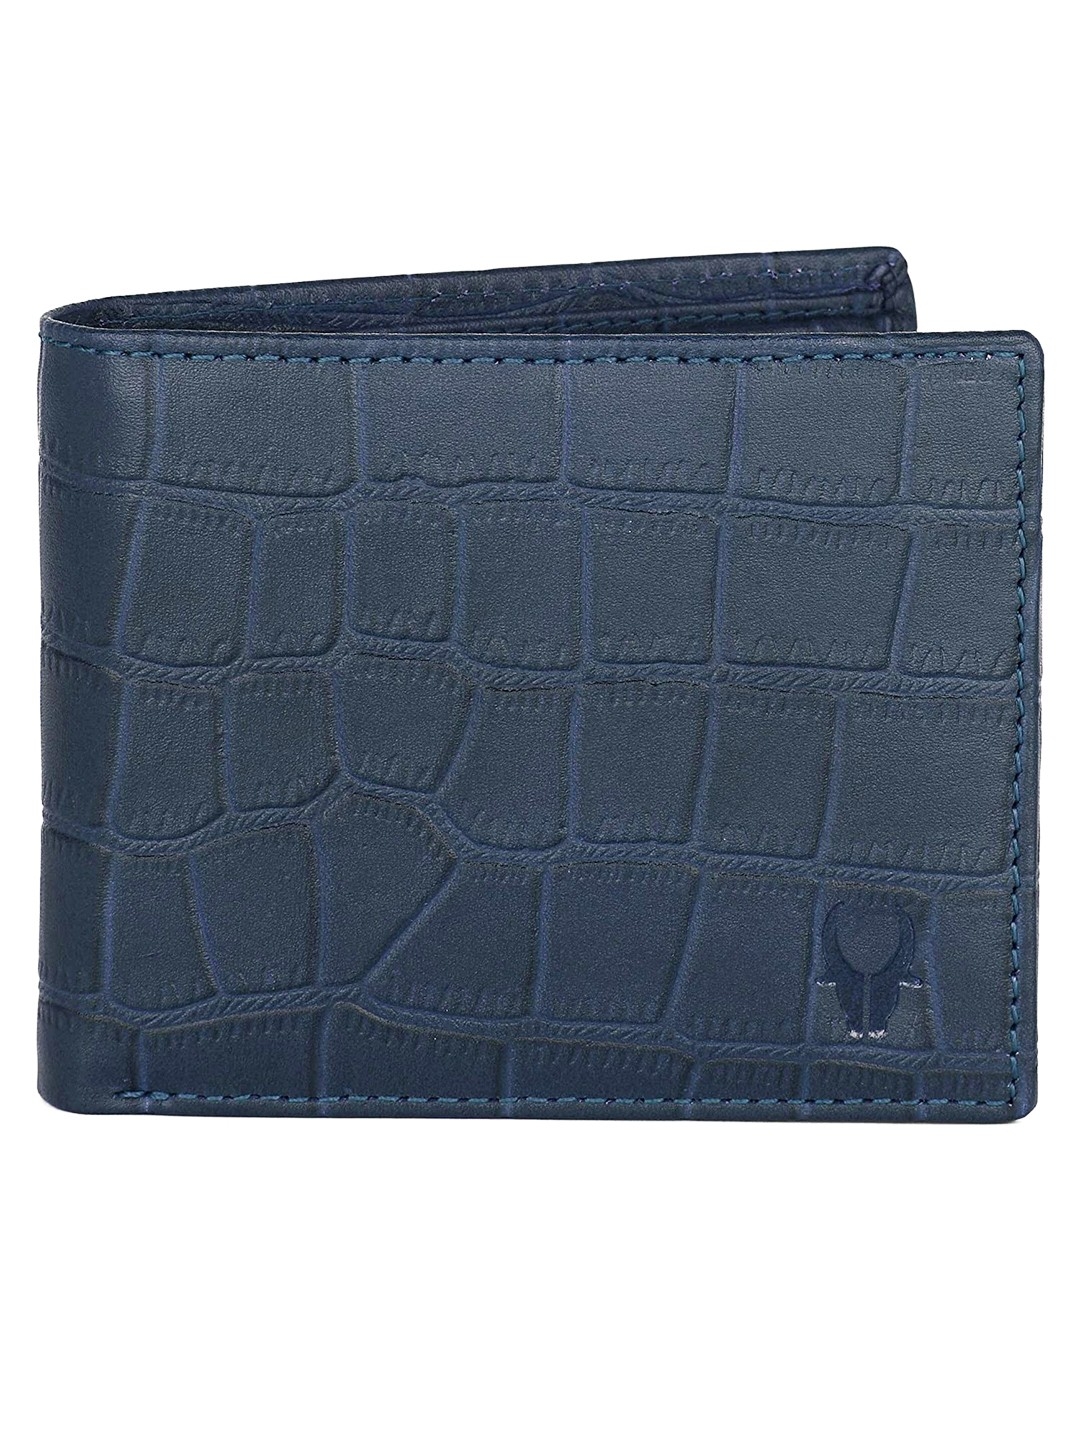 WildHorn | WildHorn RFID Protected Genuine High Quality Leather Blue Wallet for Men